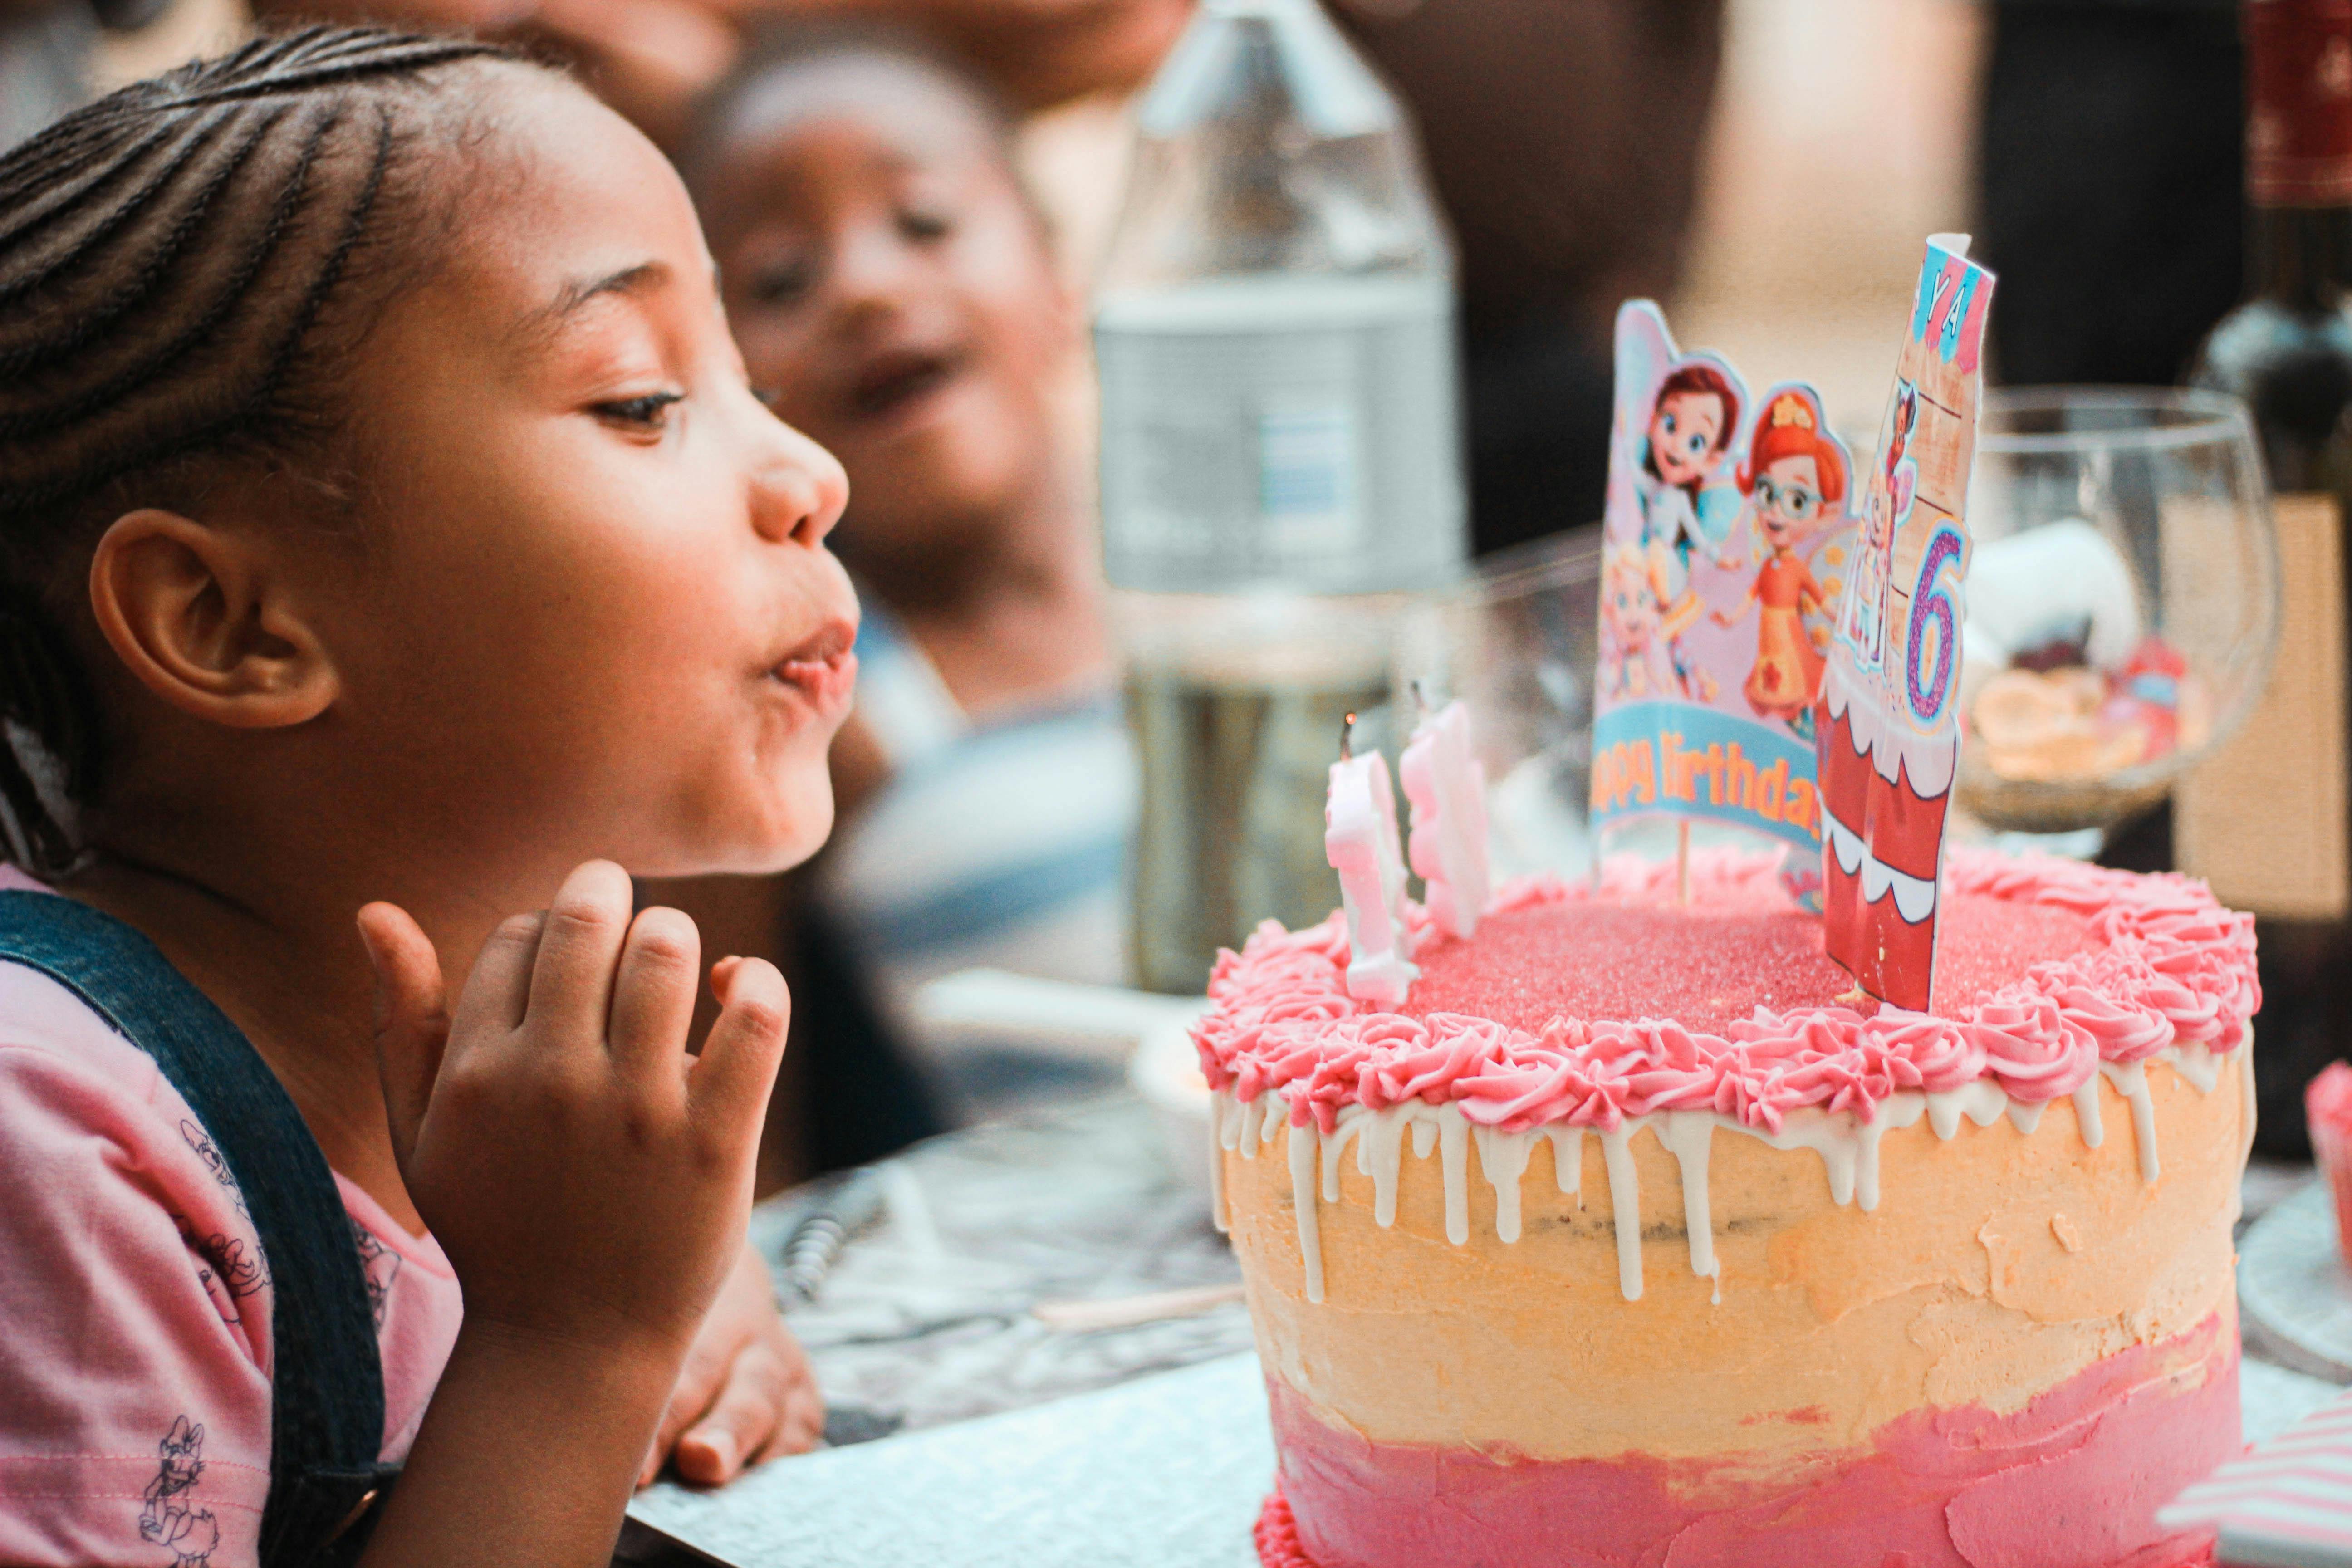 A girl blowing the candles on her cake | Source: Pexels